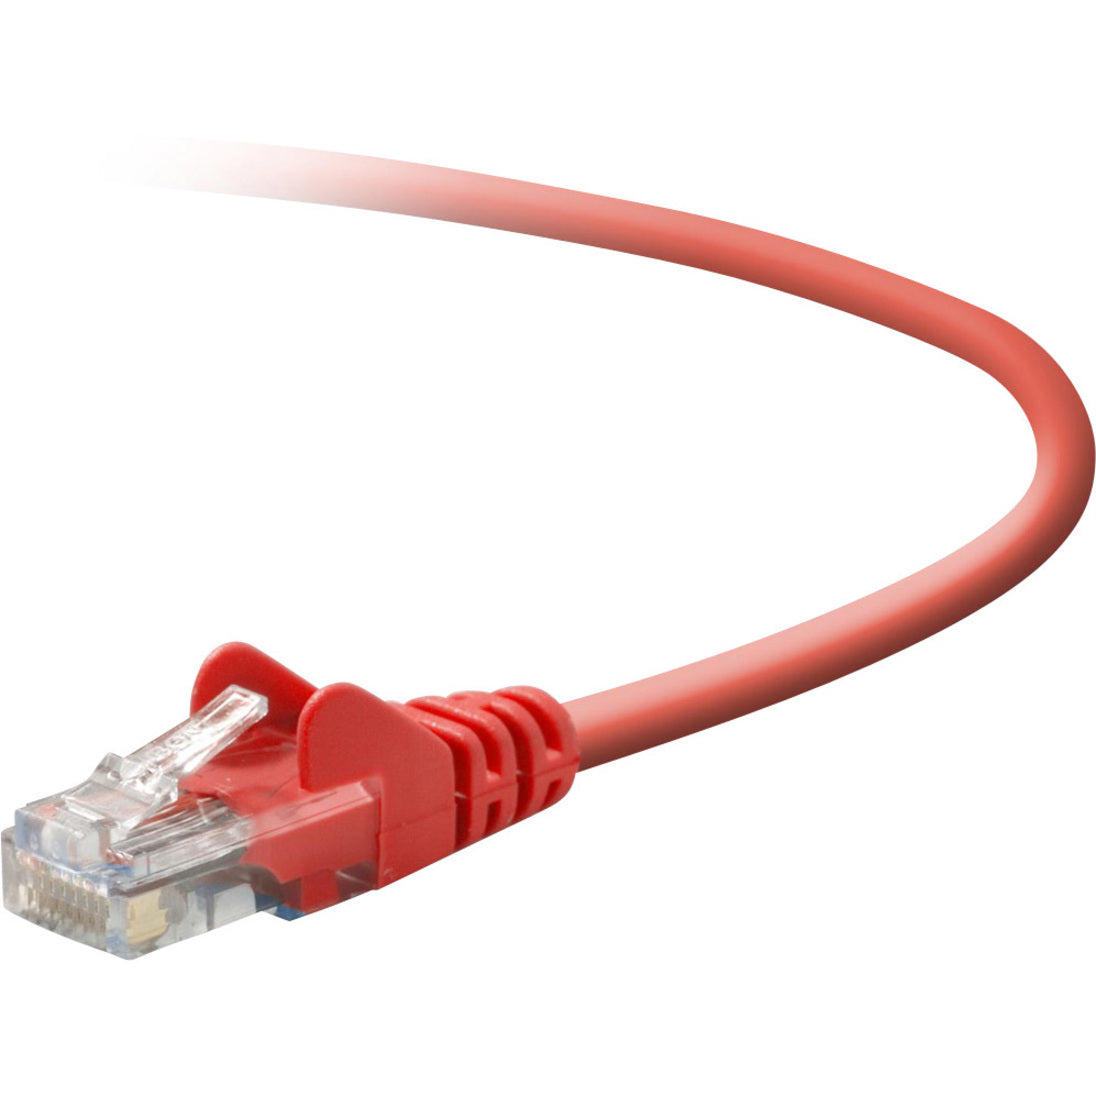 Belkin A3X126-03-RED-S Cat5e Crossover Cable, 3 ft, Premium Snagless Moldings